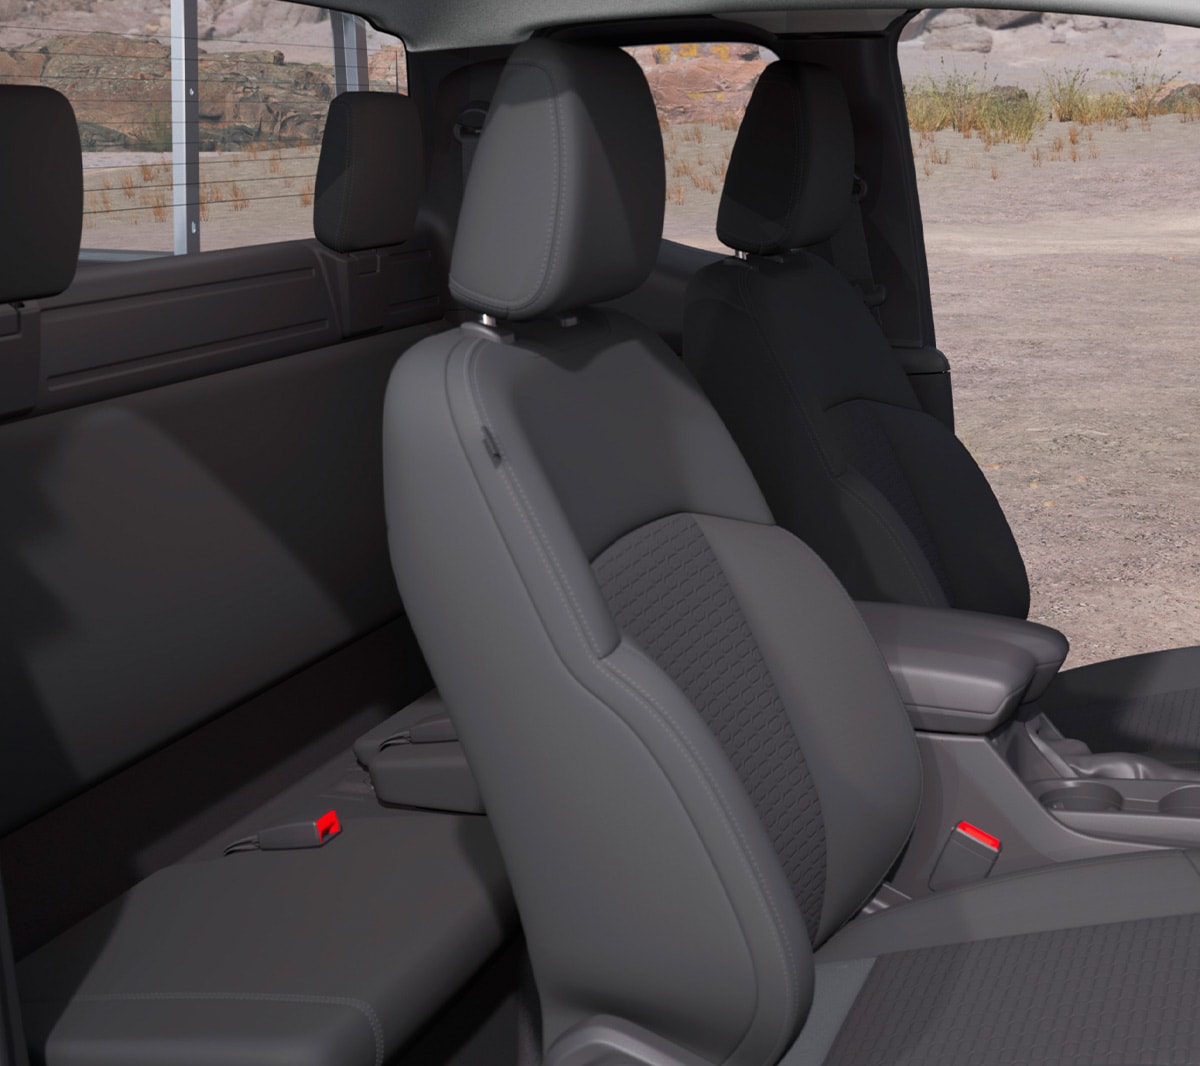 All-New Ranger in Moondust Silver front seats